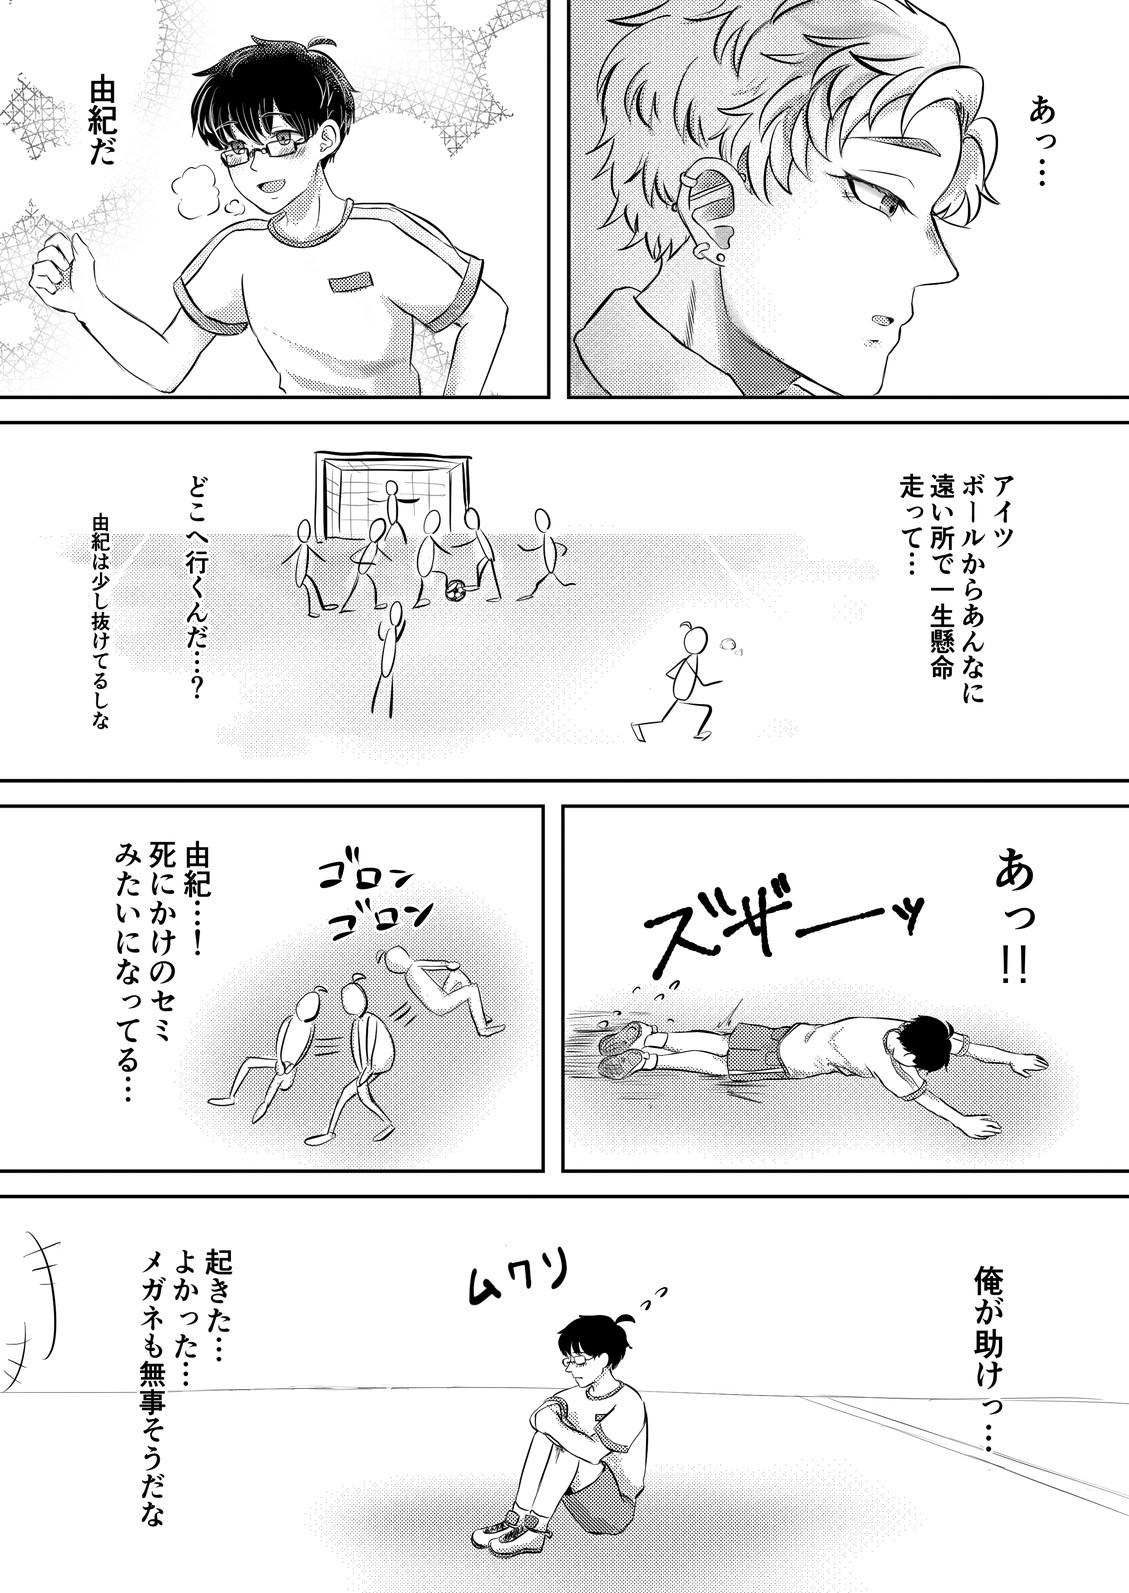 Mama 龍馬君の特等席 Butts - Page 6